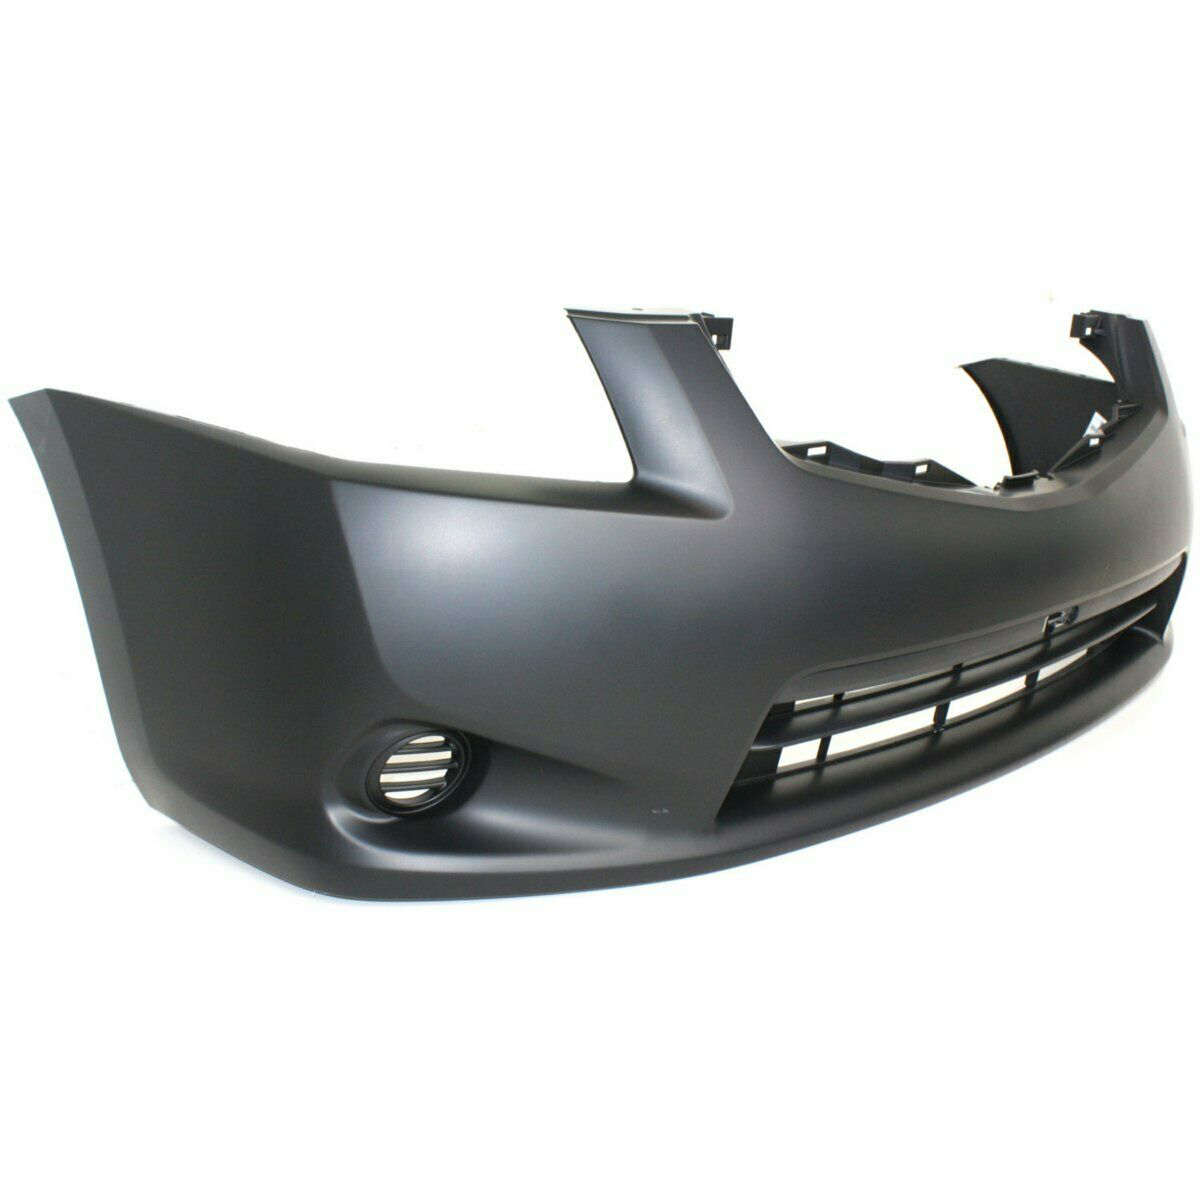 2010-2012 Nissan Sentra Base/S Model Front Bumper Painted to Match